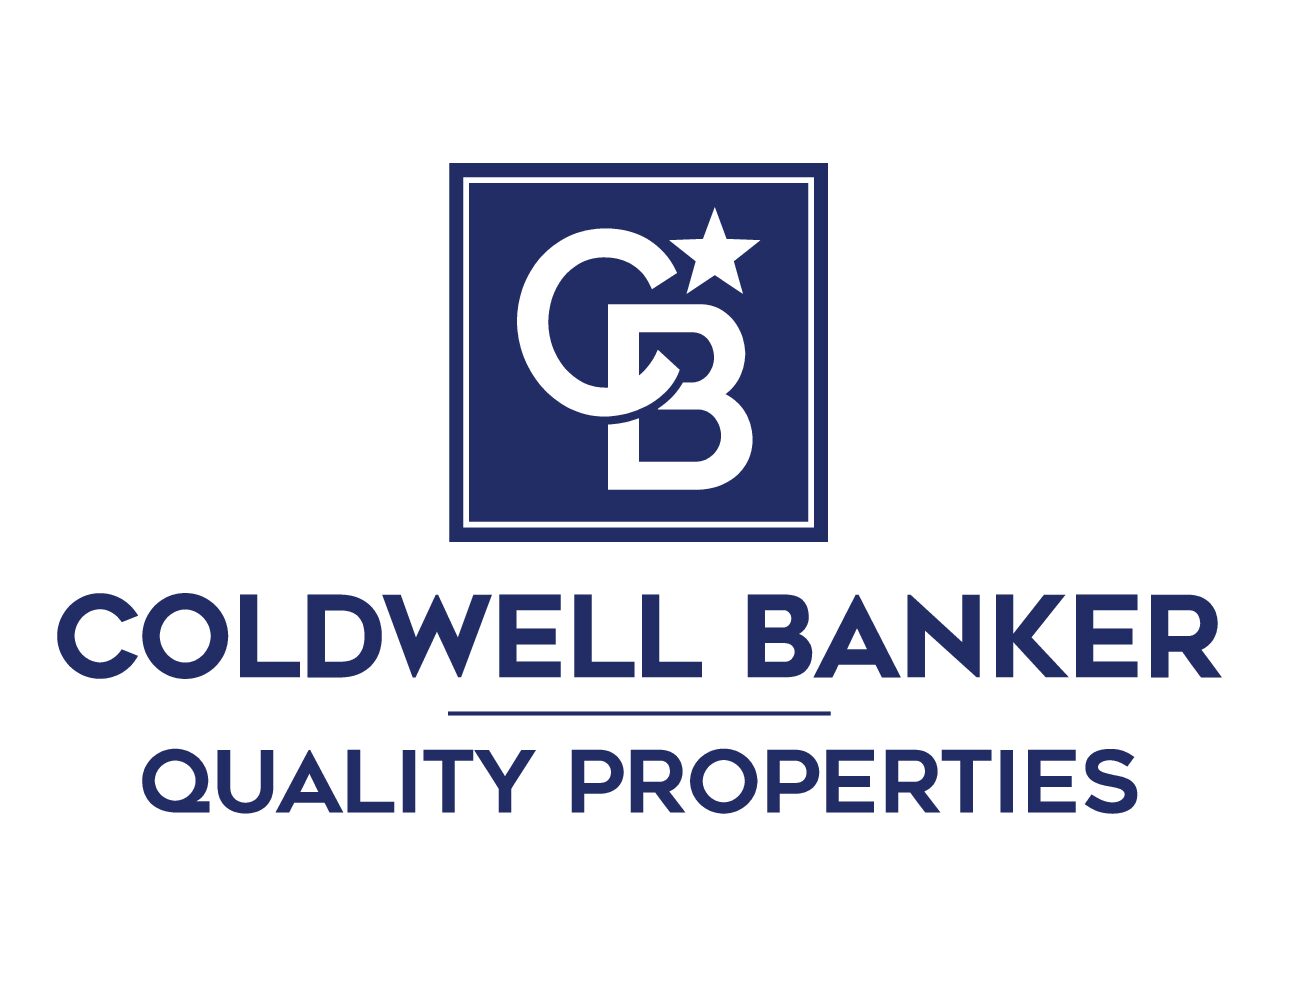 Coldwell Banker Quality Properties